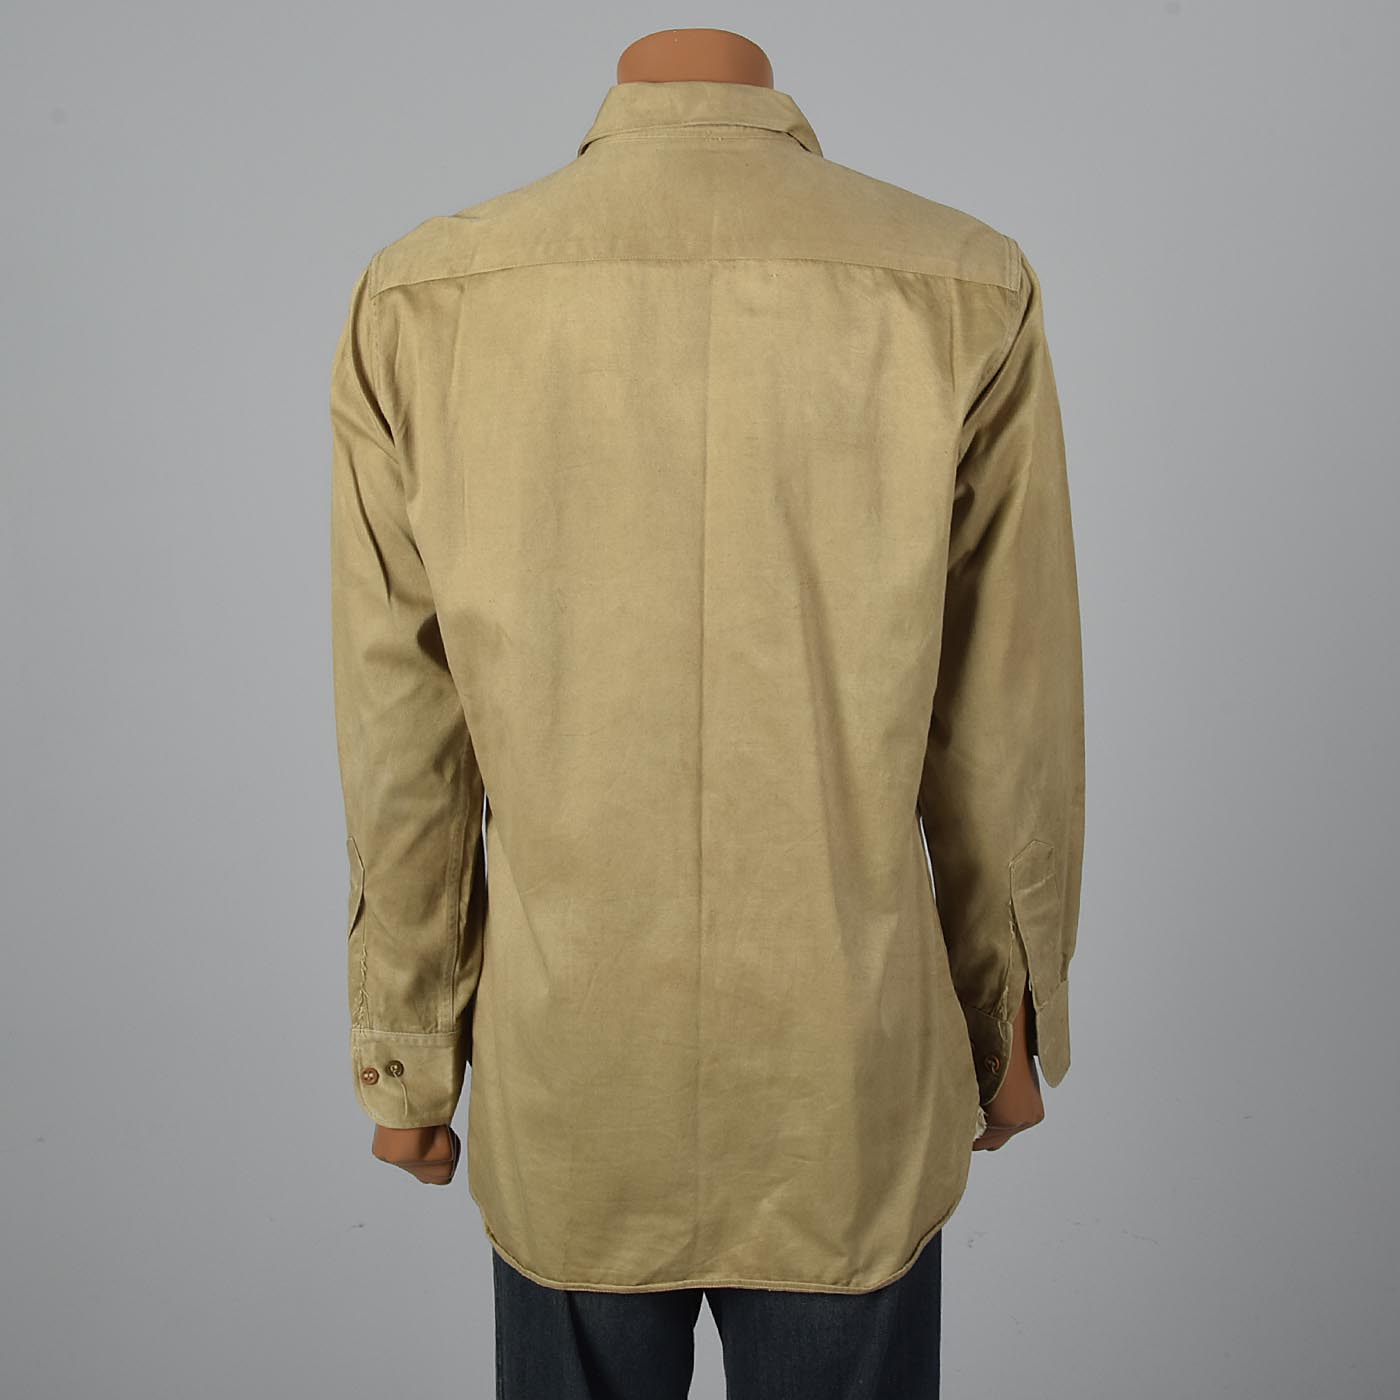 1940s WW2 Khaki Uniform Shirt with Honorable Discharge Patch